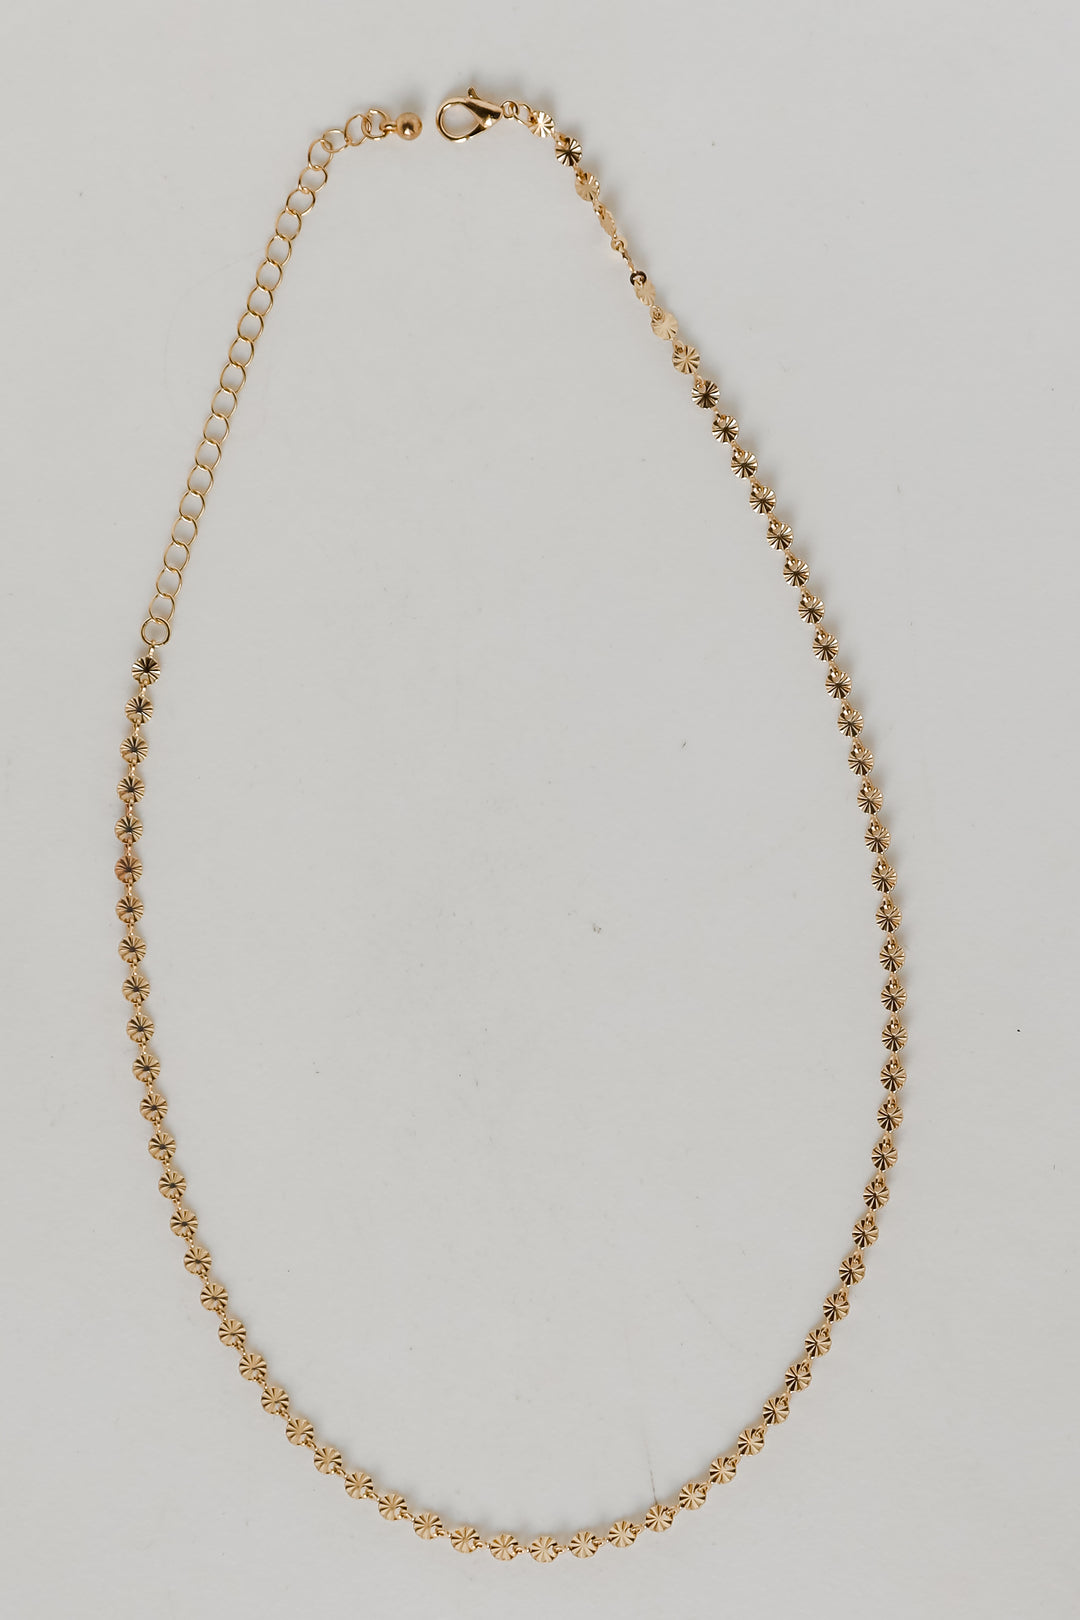 Adeline Gold Chain Necklace